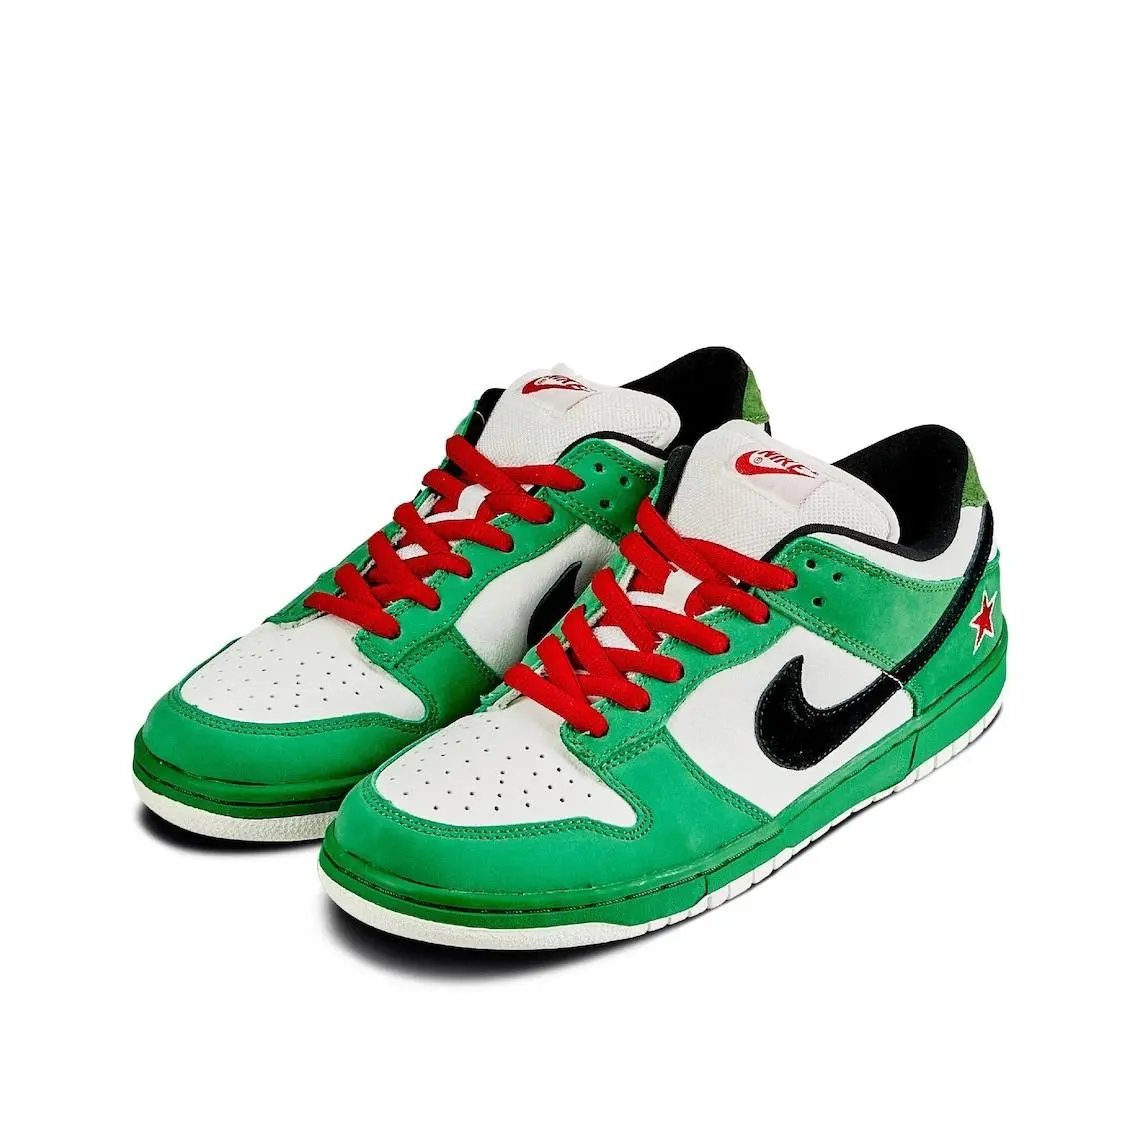 A green and red low-top sneaker with the Heineken beer logo on the heel and a white Nike swoosh on the side.